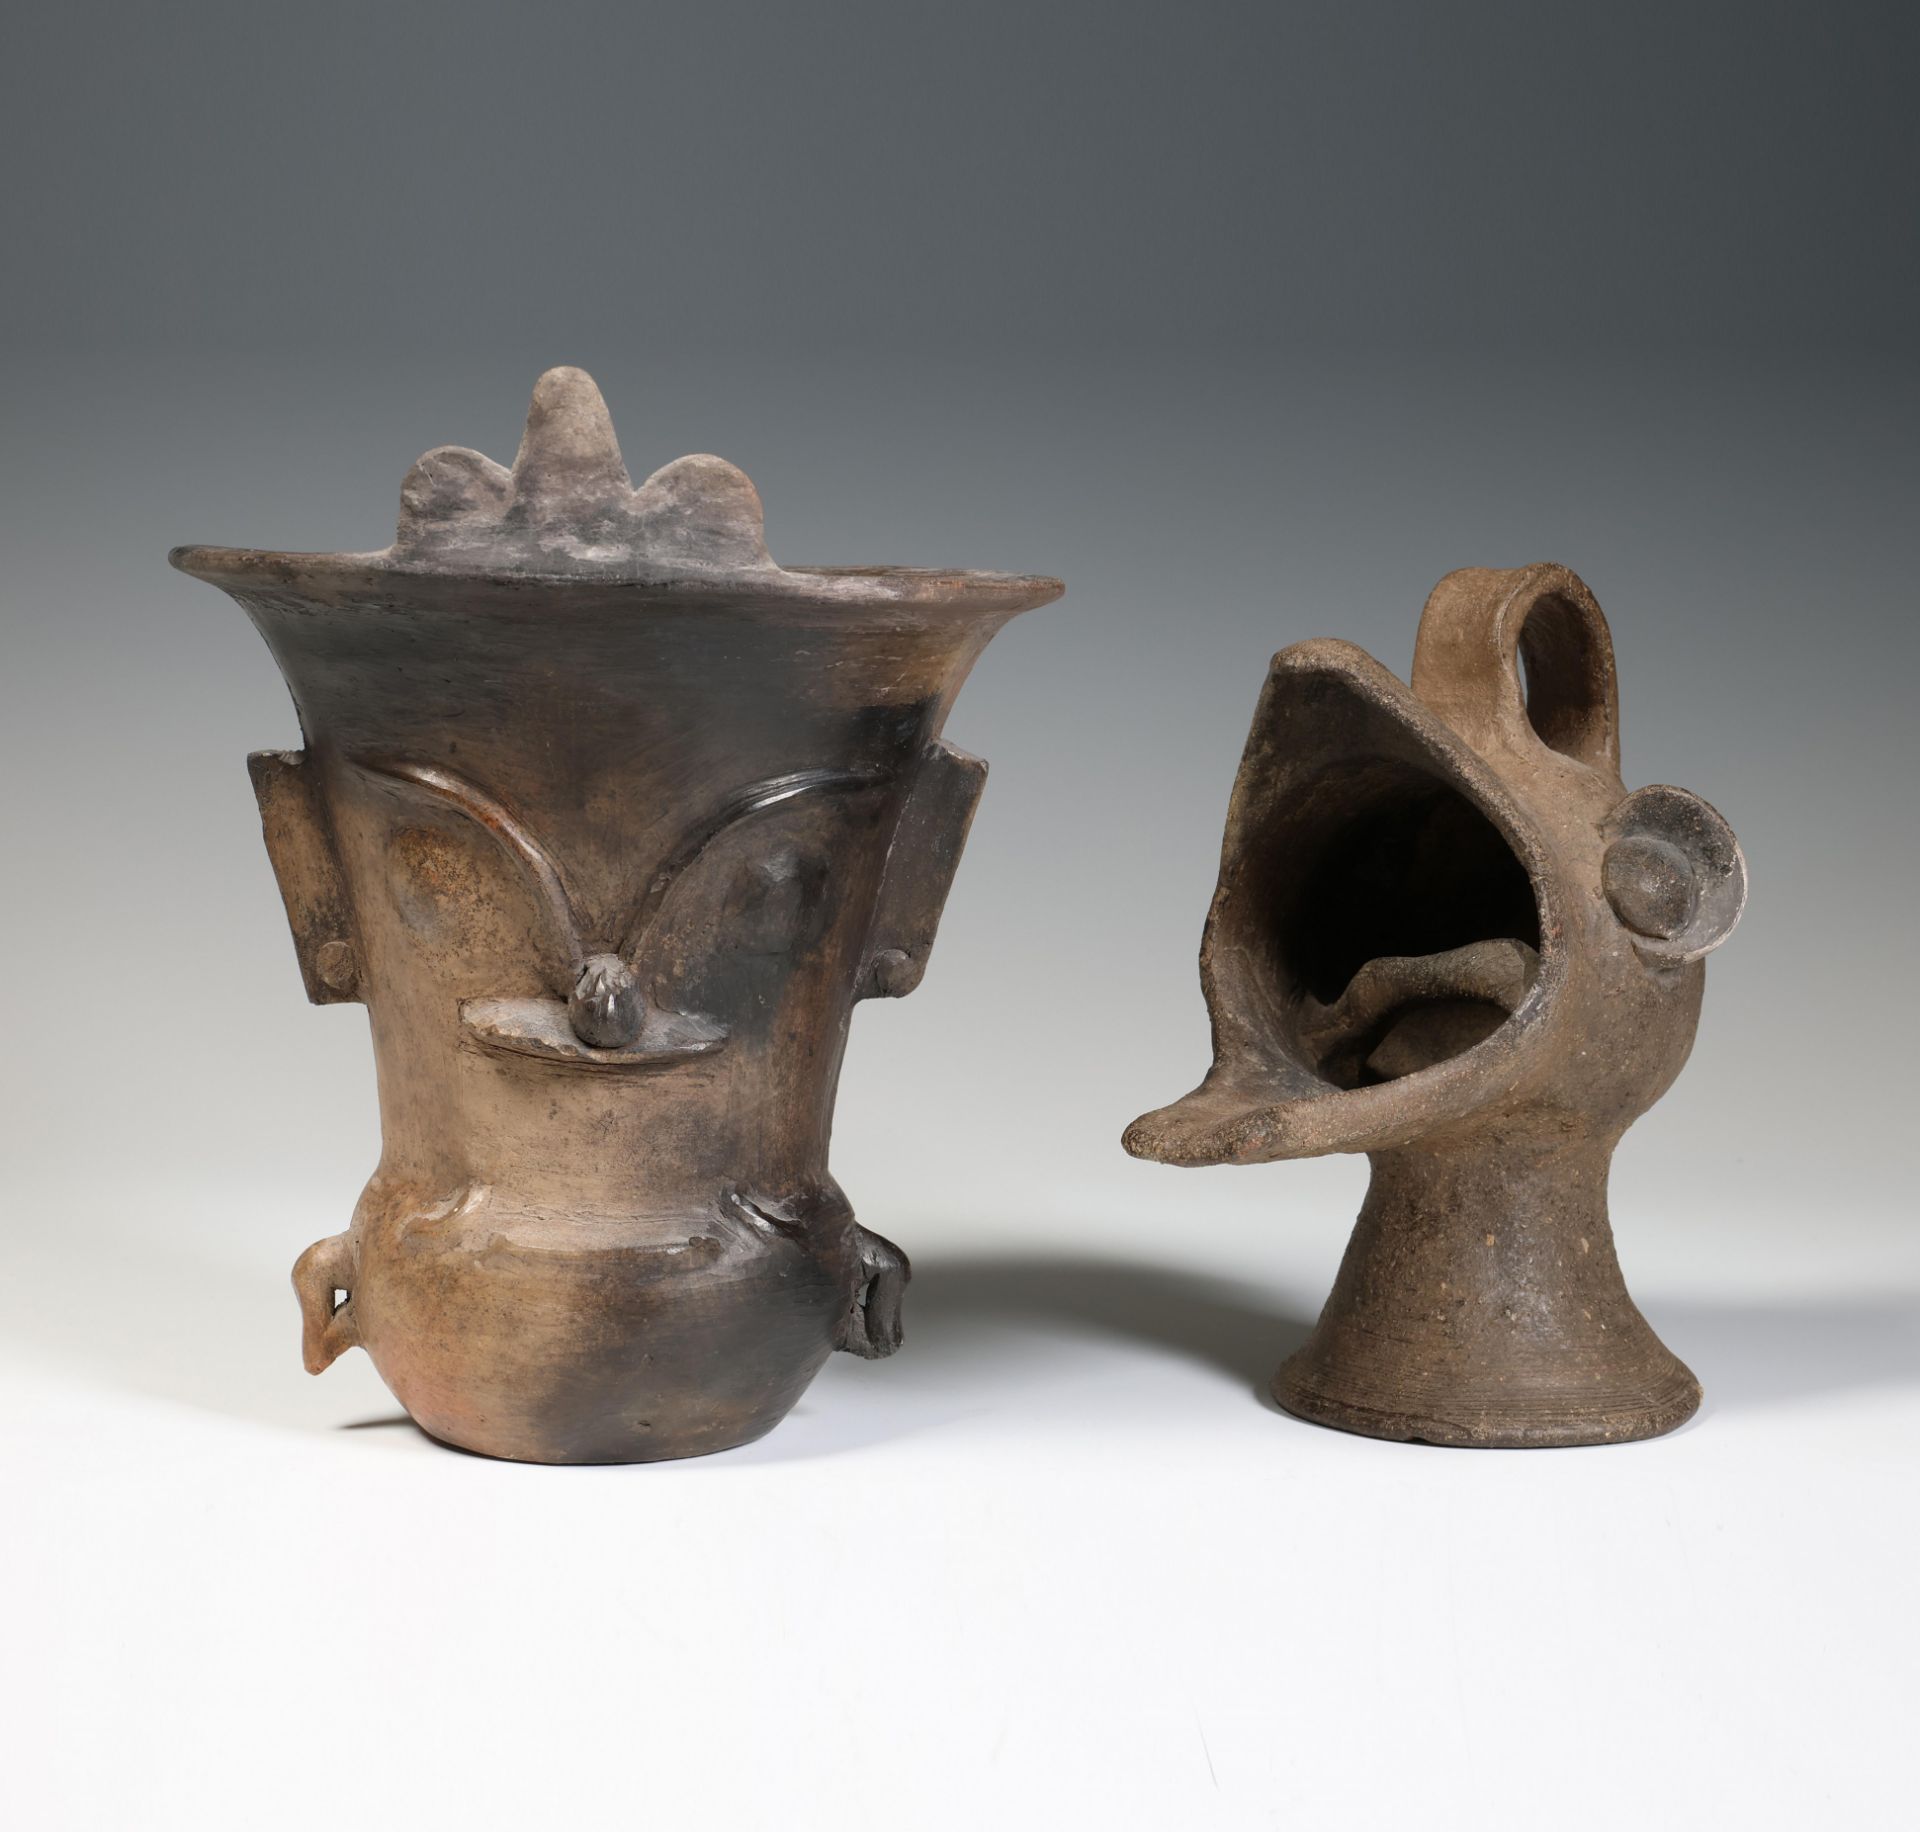 Mexico, two antique terracotta pots, probably Mayan one in the shape of an anthropomorphic figure an